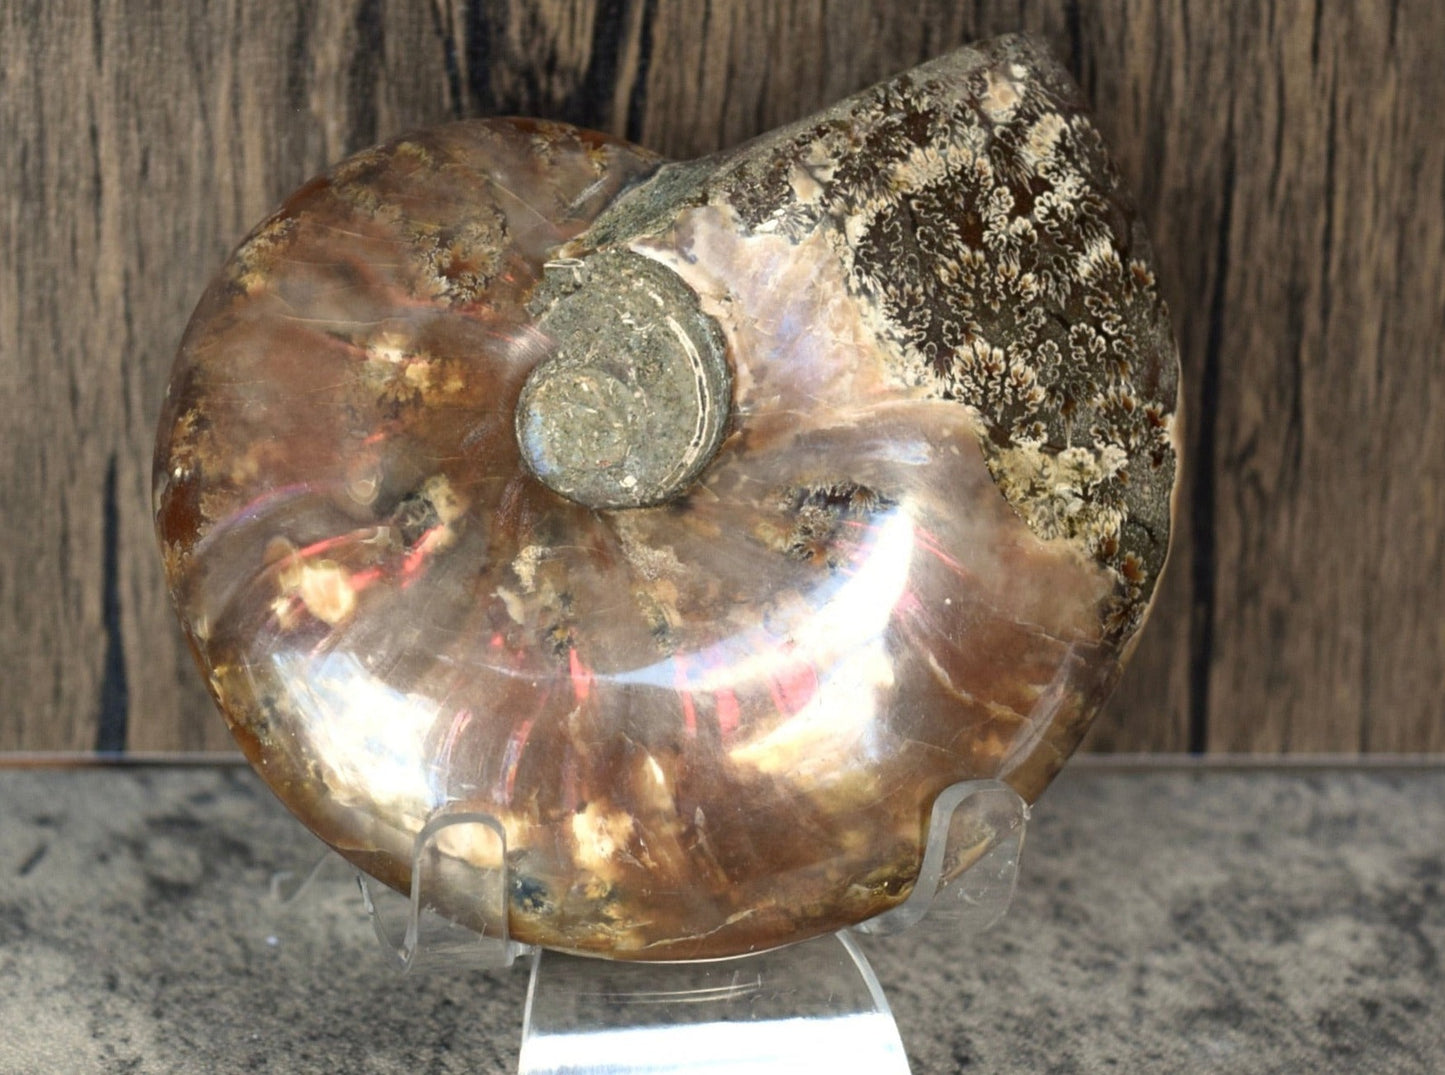 Ammonite (For Stability) - Shell Fossil